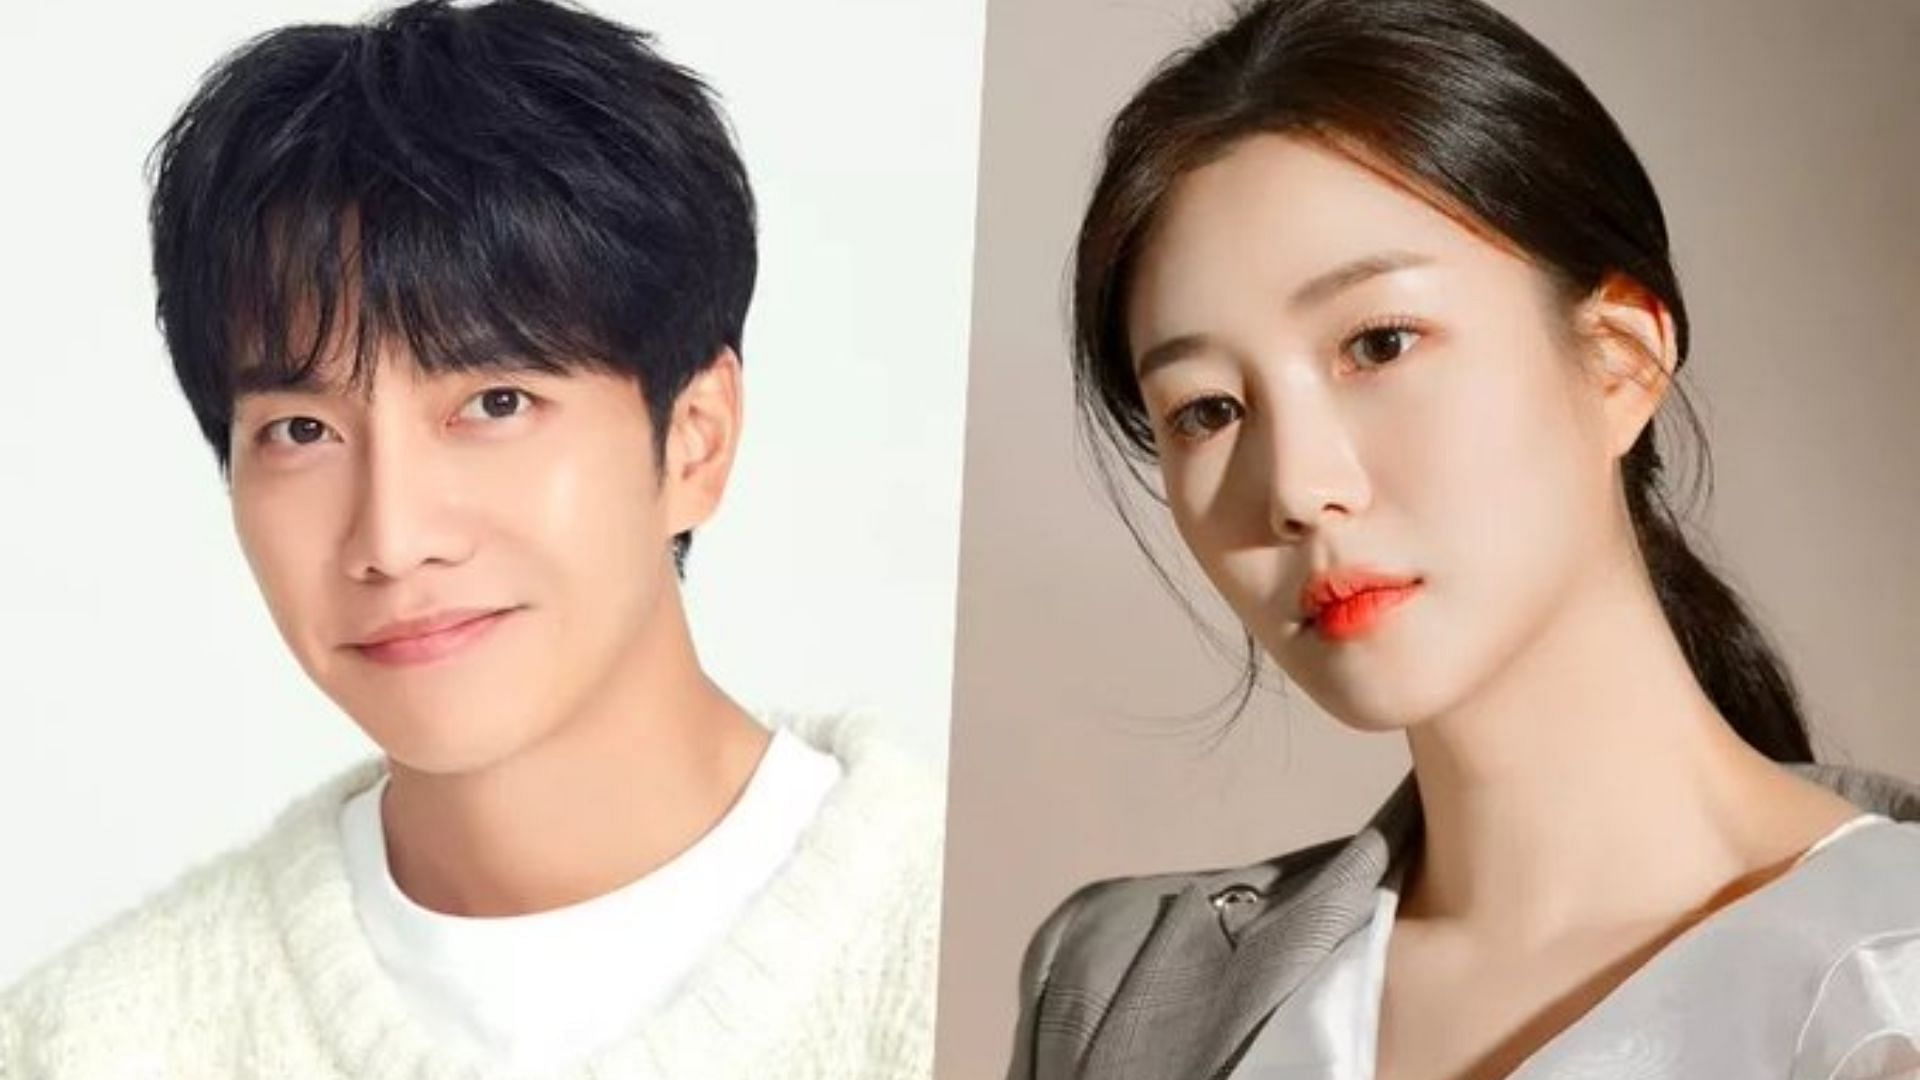 Lee Seung-gi and Lee Da-in announce they will be getting married (Image via Twitter/@TheSarangheOppa)